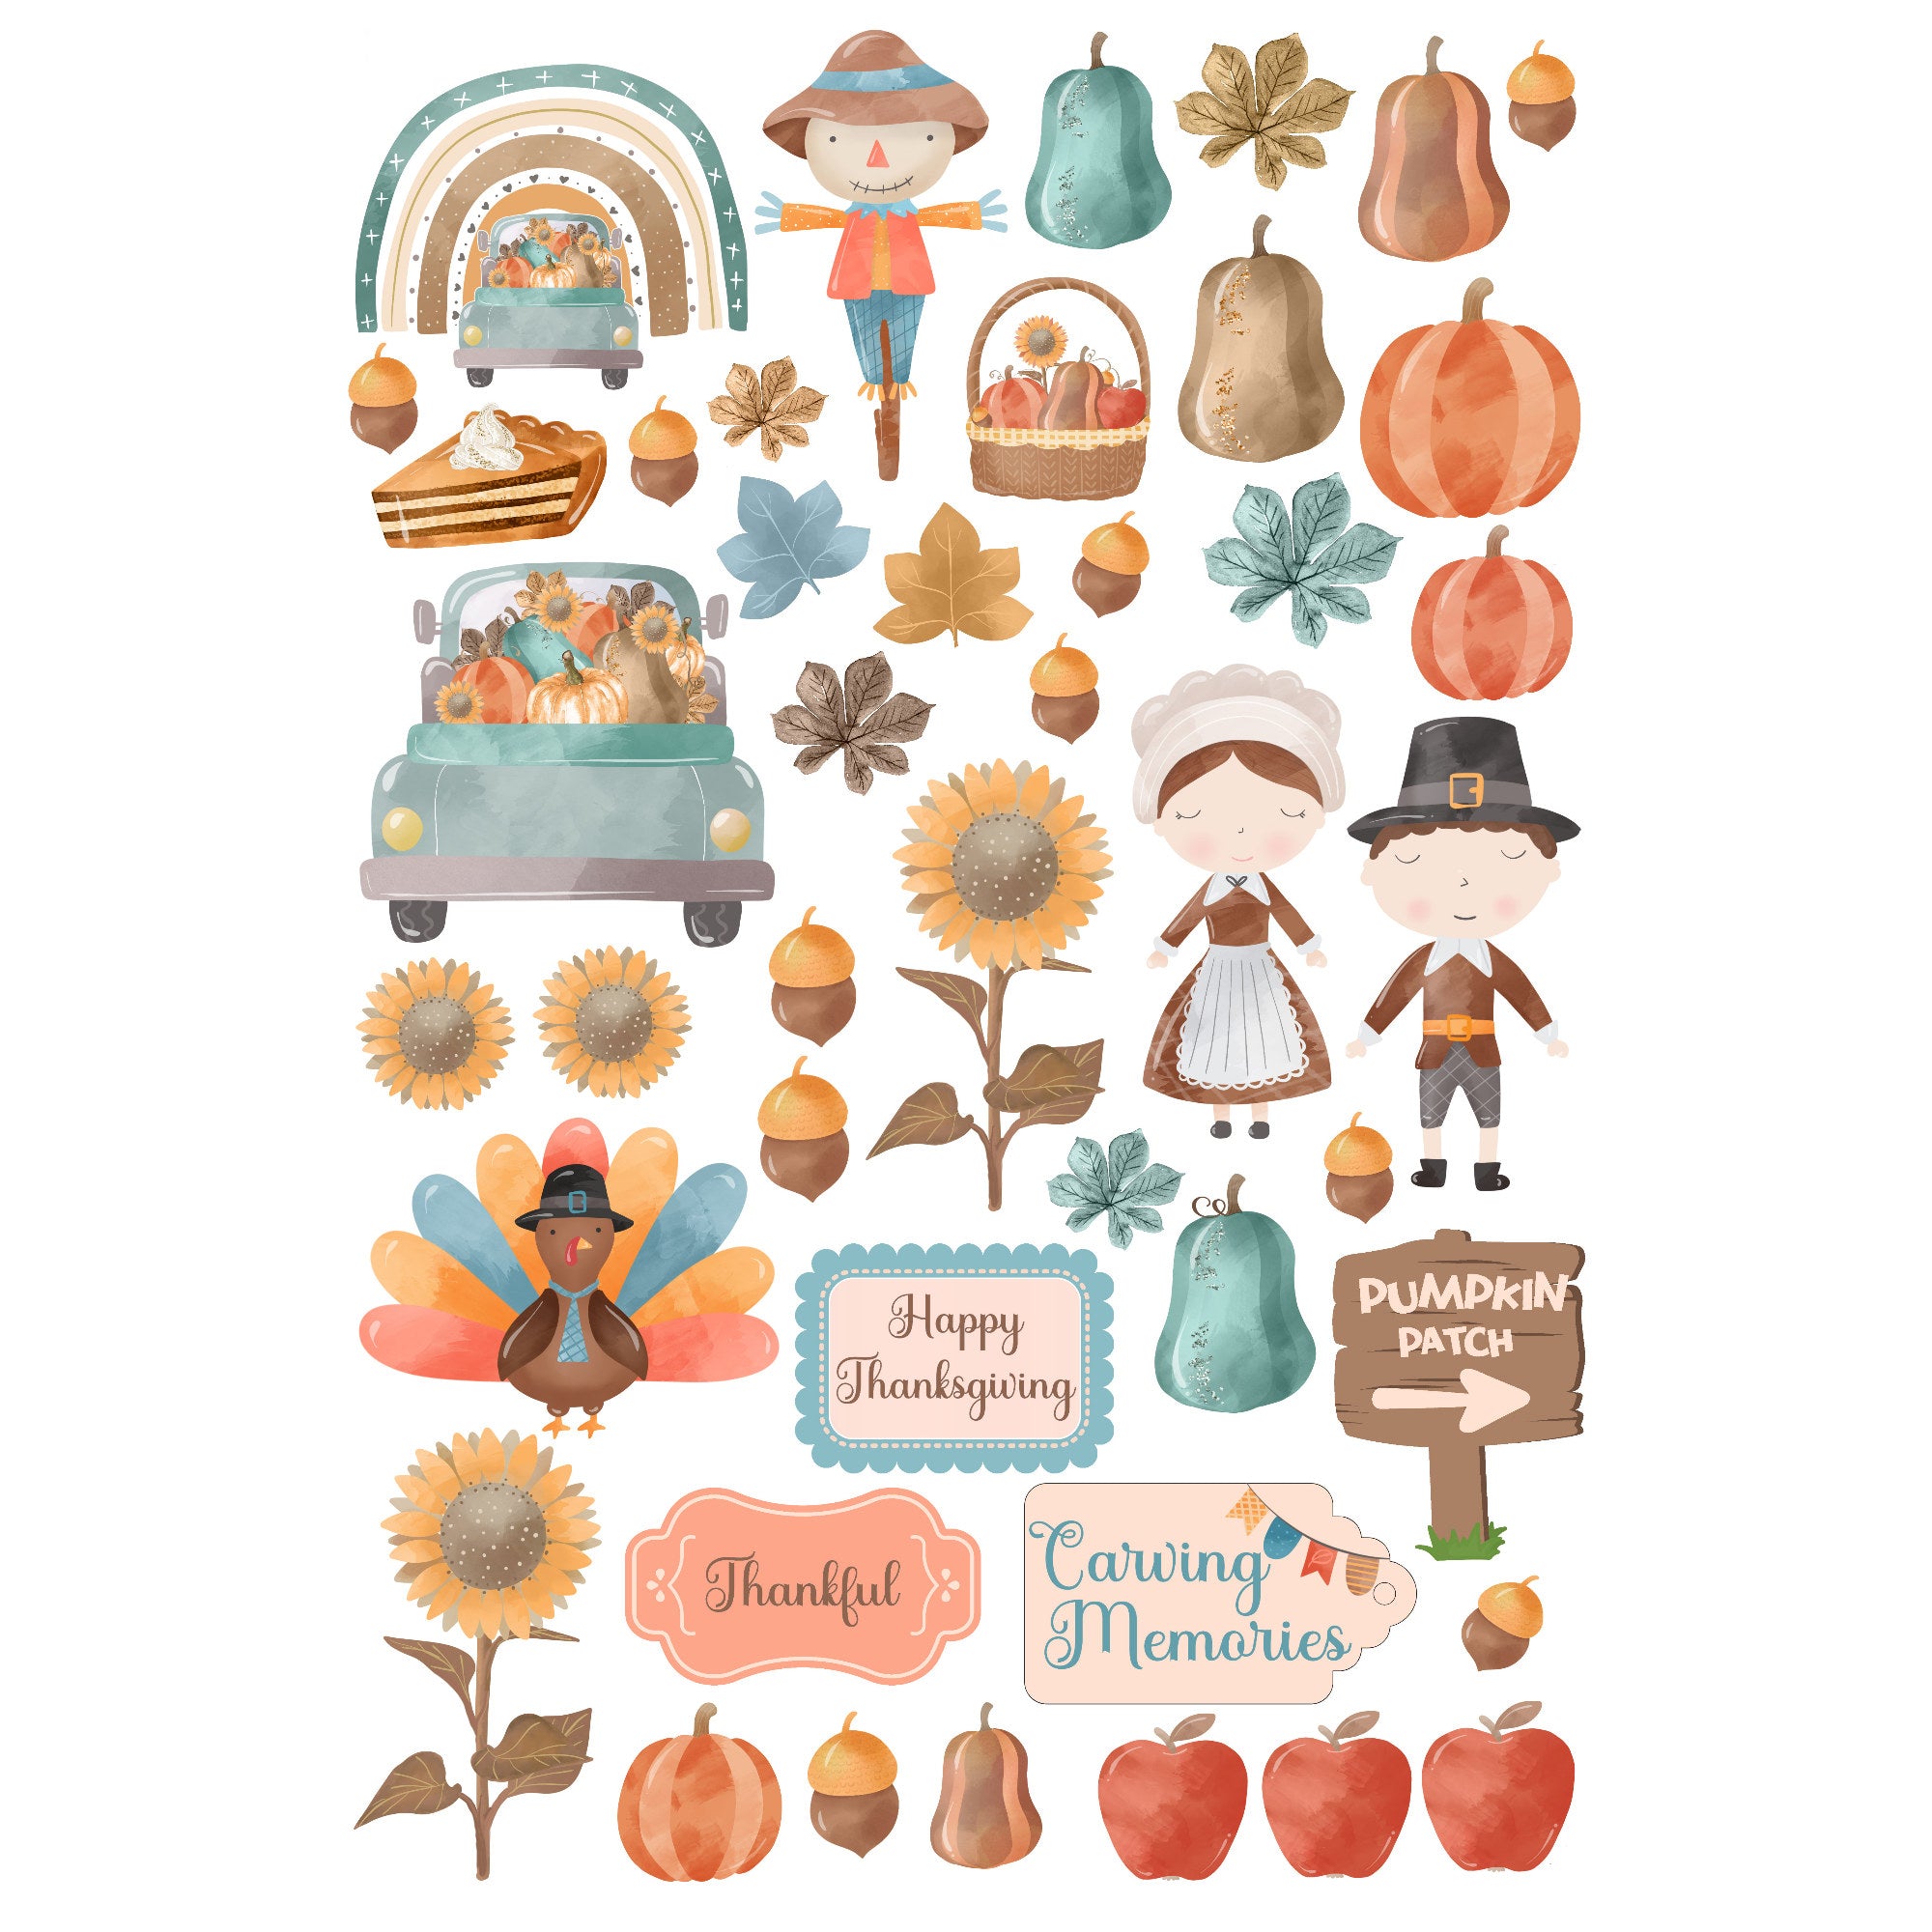 Give Thanks 12 x 12 Scrapbook Paper & Embellishment Kit by SSC Designs